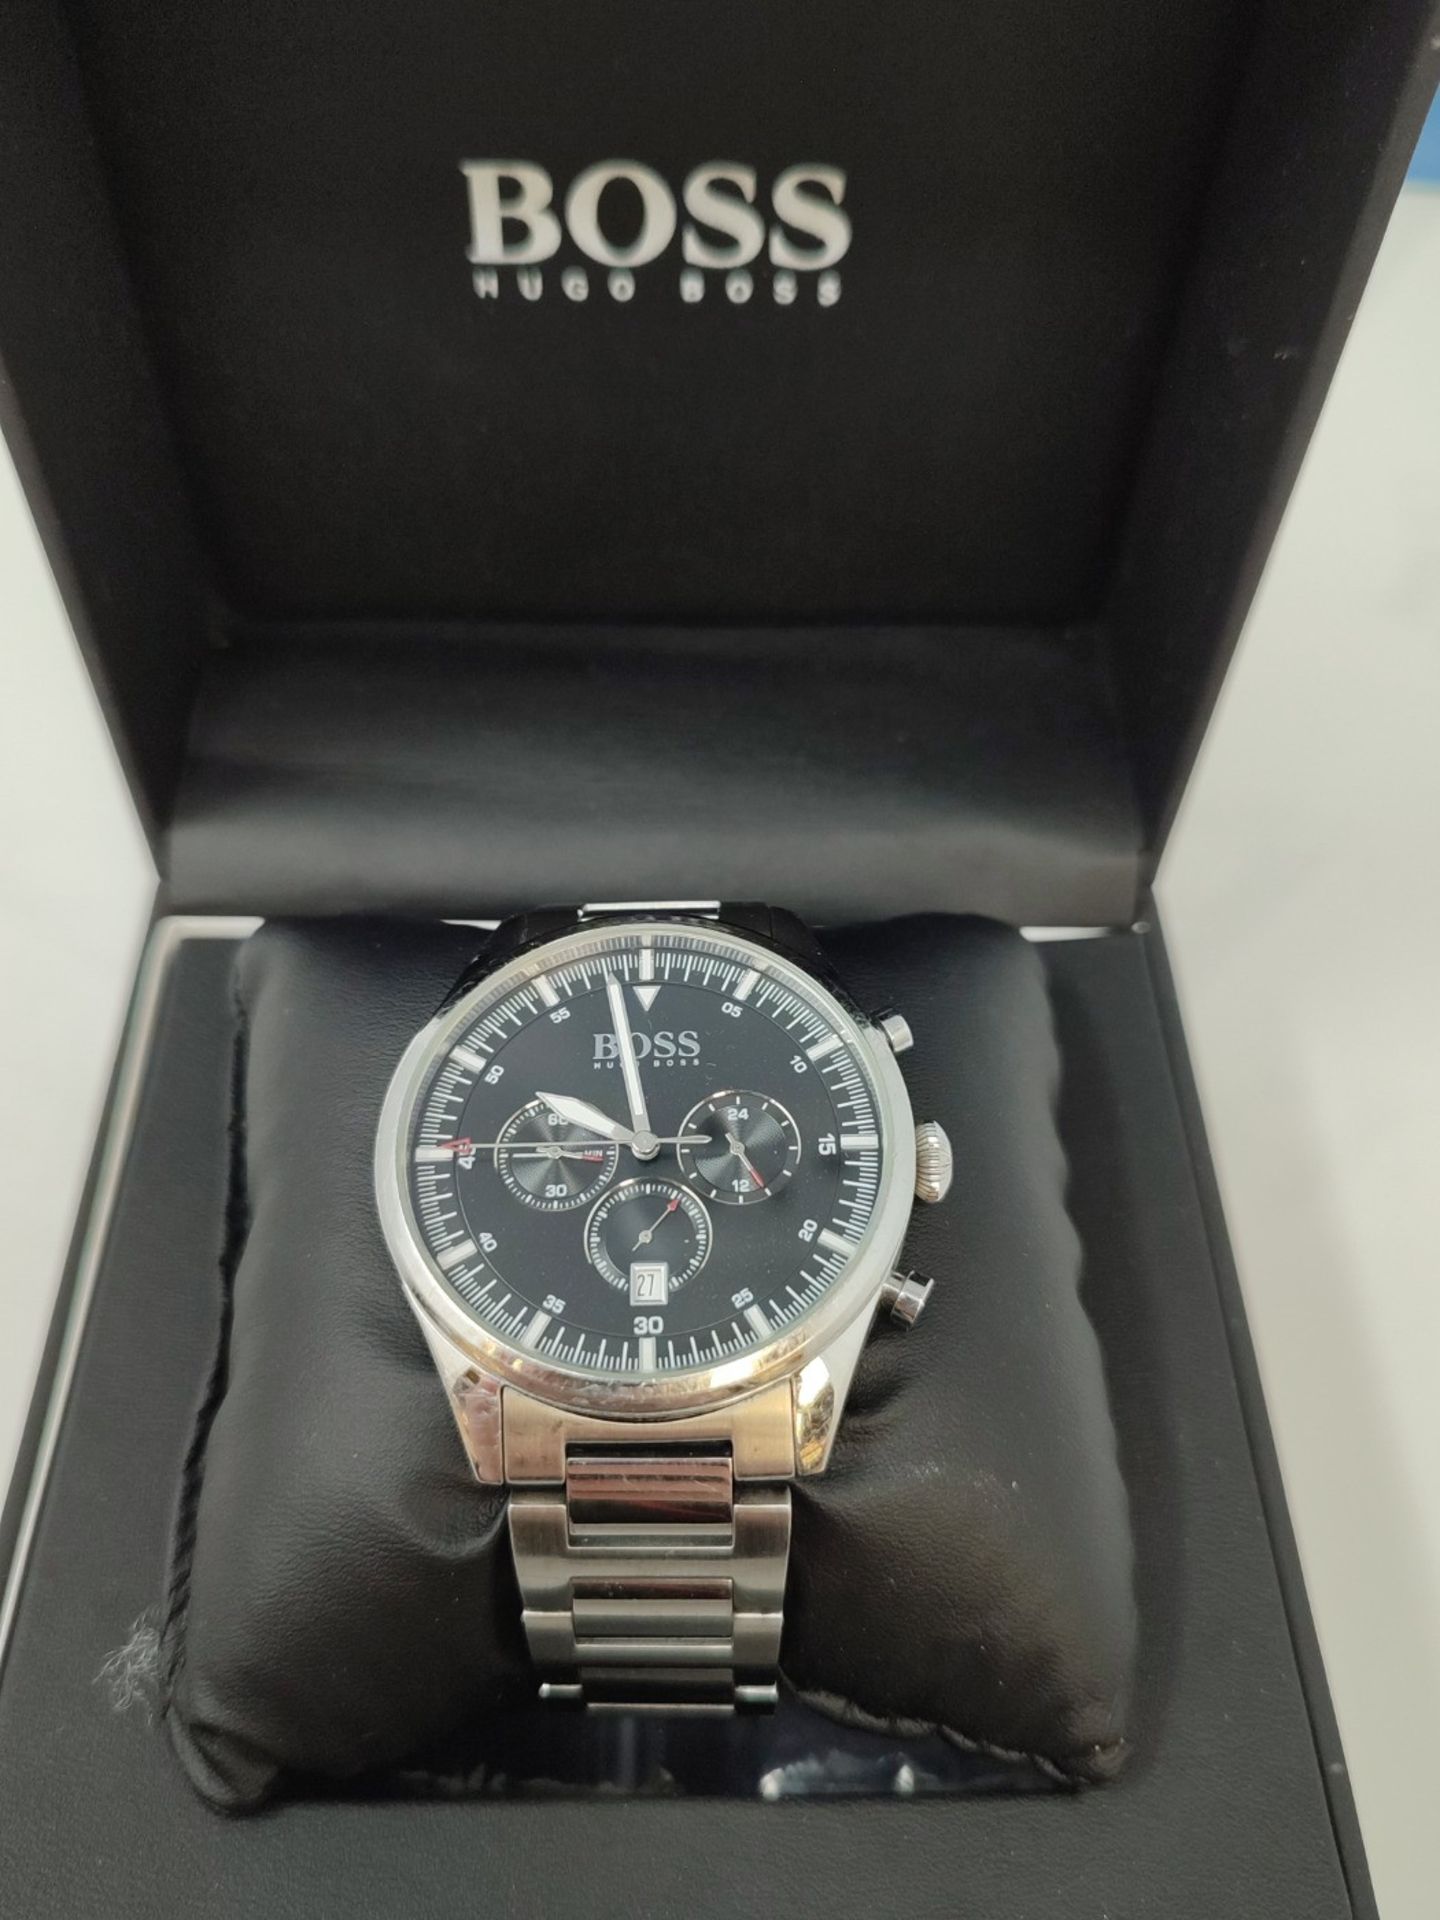 RRP £249.00 BOSS Chronograph Quartz Watch for Men with Silver Stainless Steel Bracelet - 1513712 - Image 5 of 6